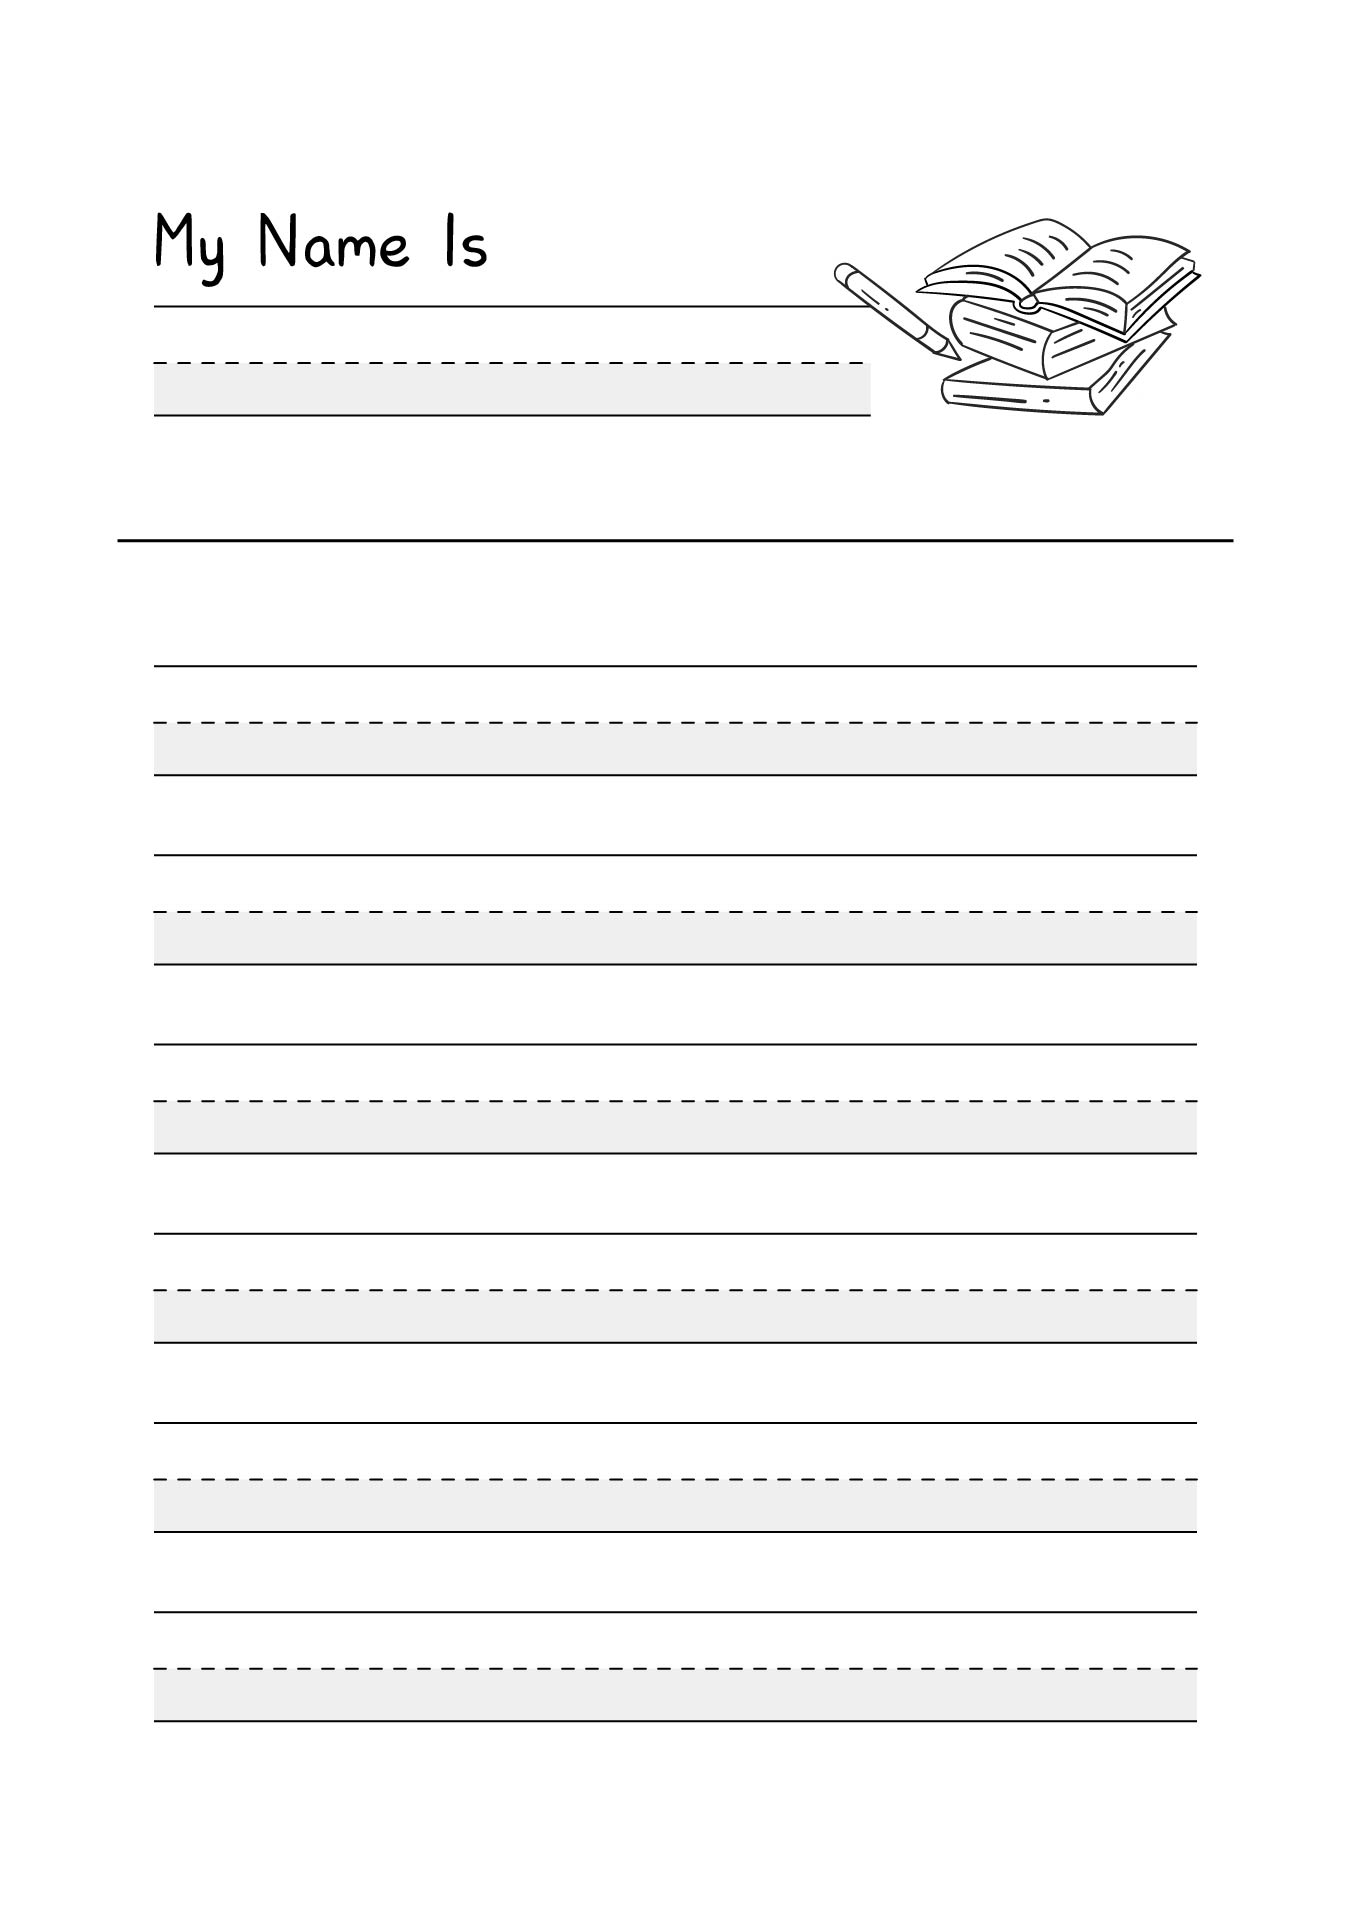 8-best-images-of-1st-grade-handwriting-printables-1st-grade-writing-worksheets-1st-grade